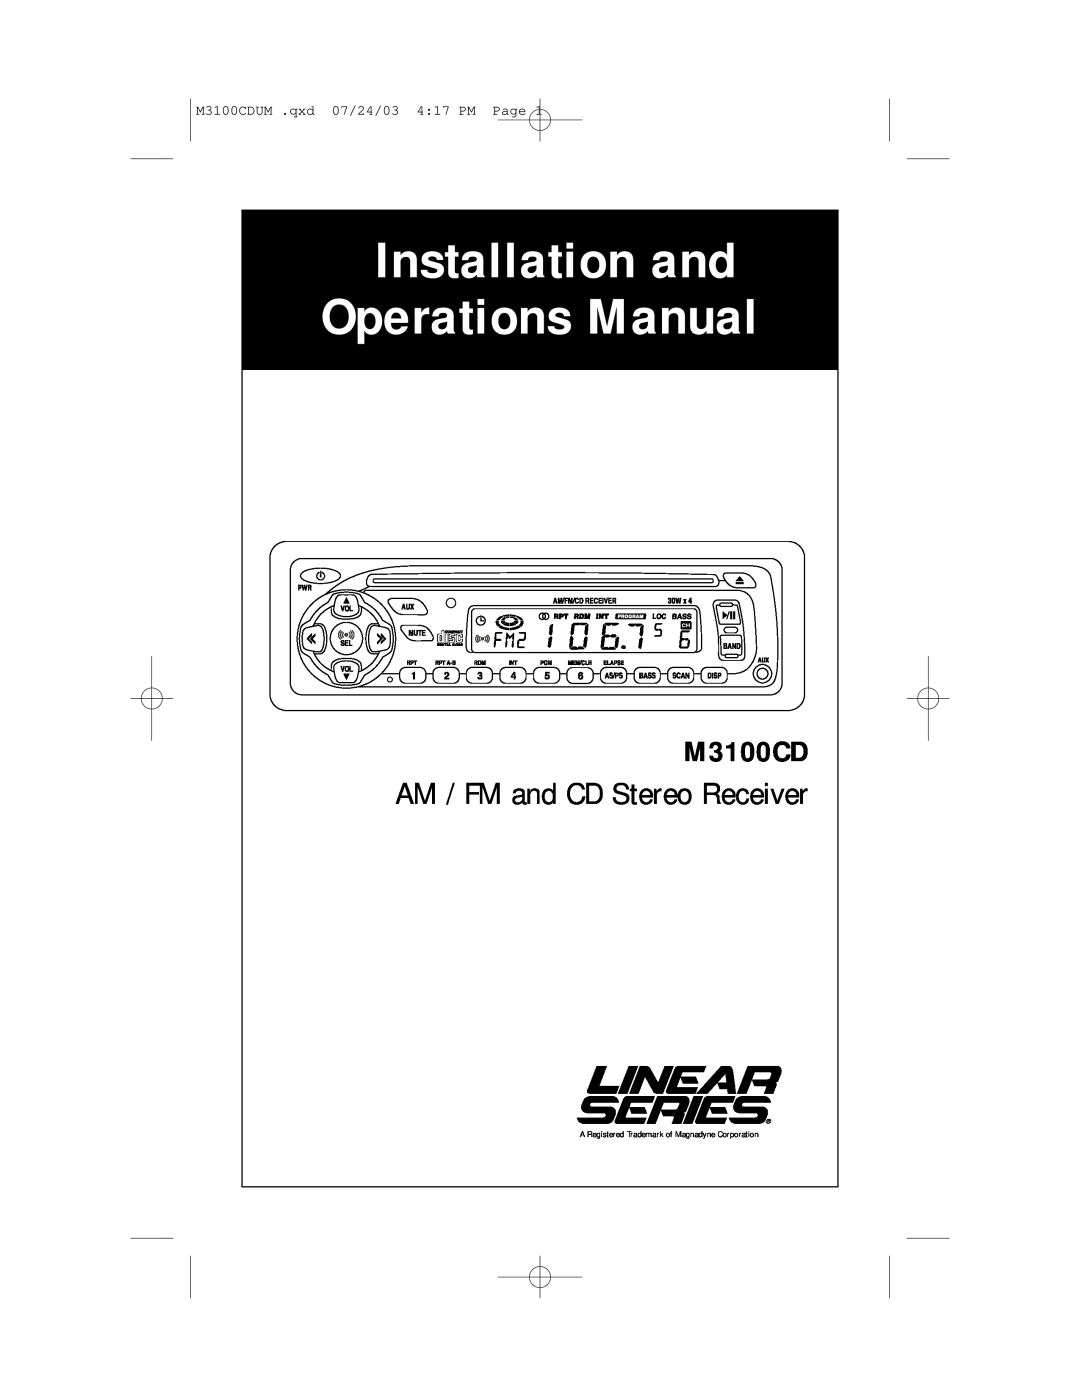 Magnadyne M3100CD manual Installation and Operations Manual, AM / FM and CD Stereo Receiver 